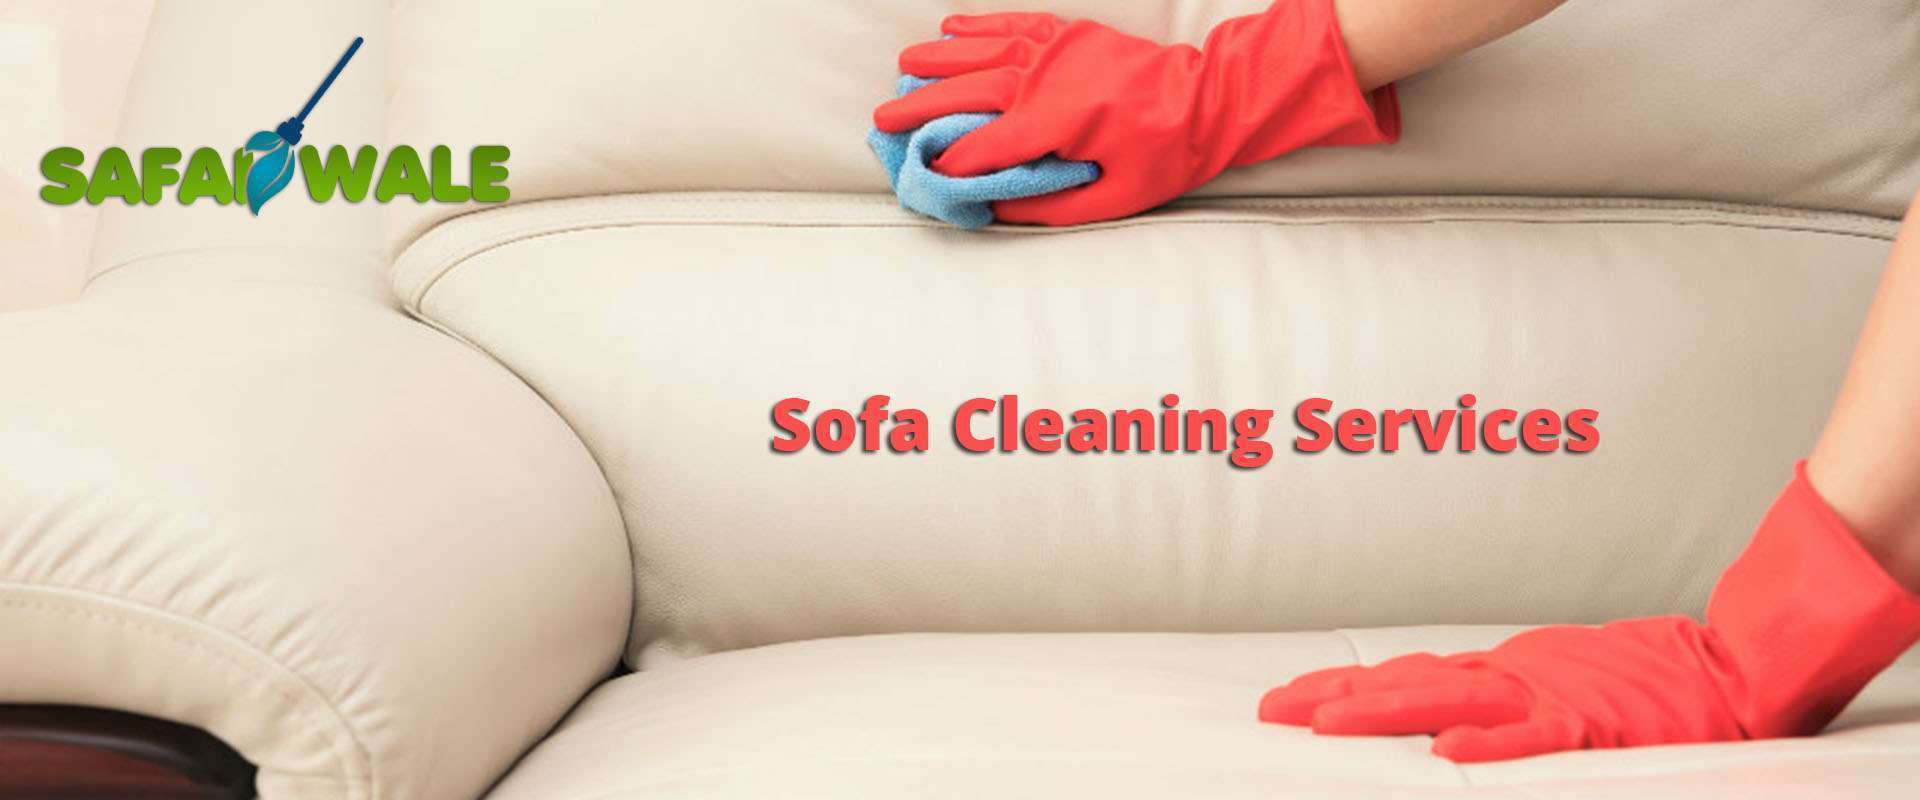 Sofa Cleaning Services In Bhubaneswar